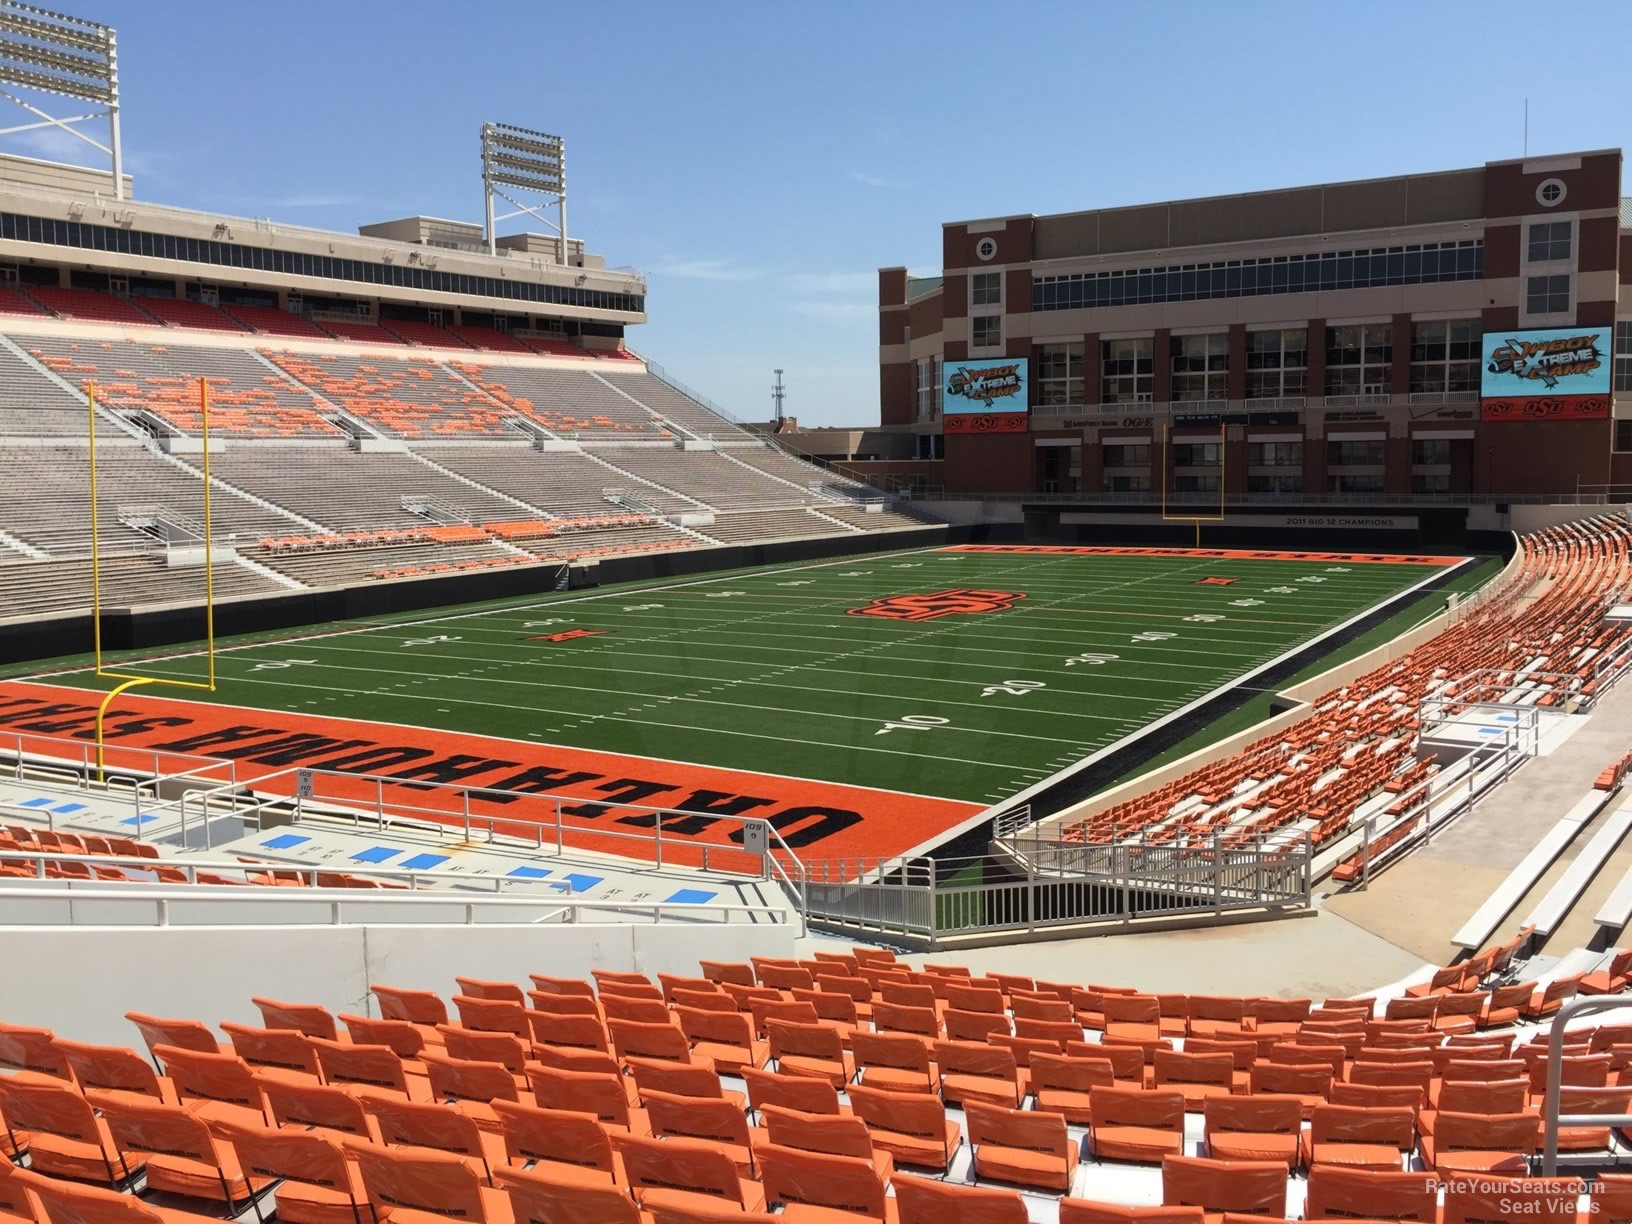 section 212, row 20 seat view  - boone pickens stadium